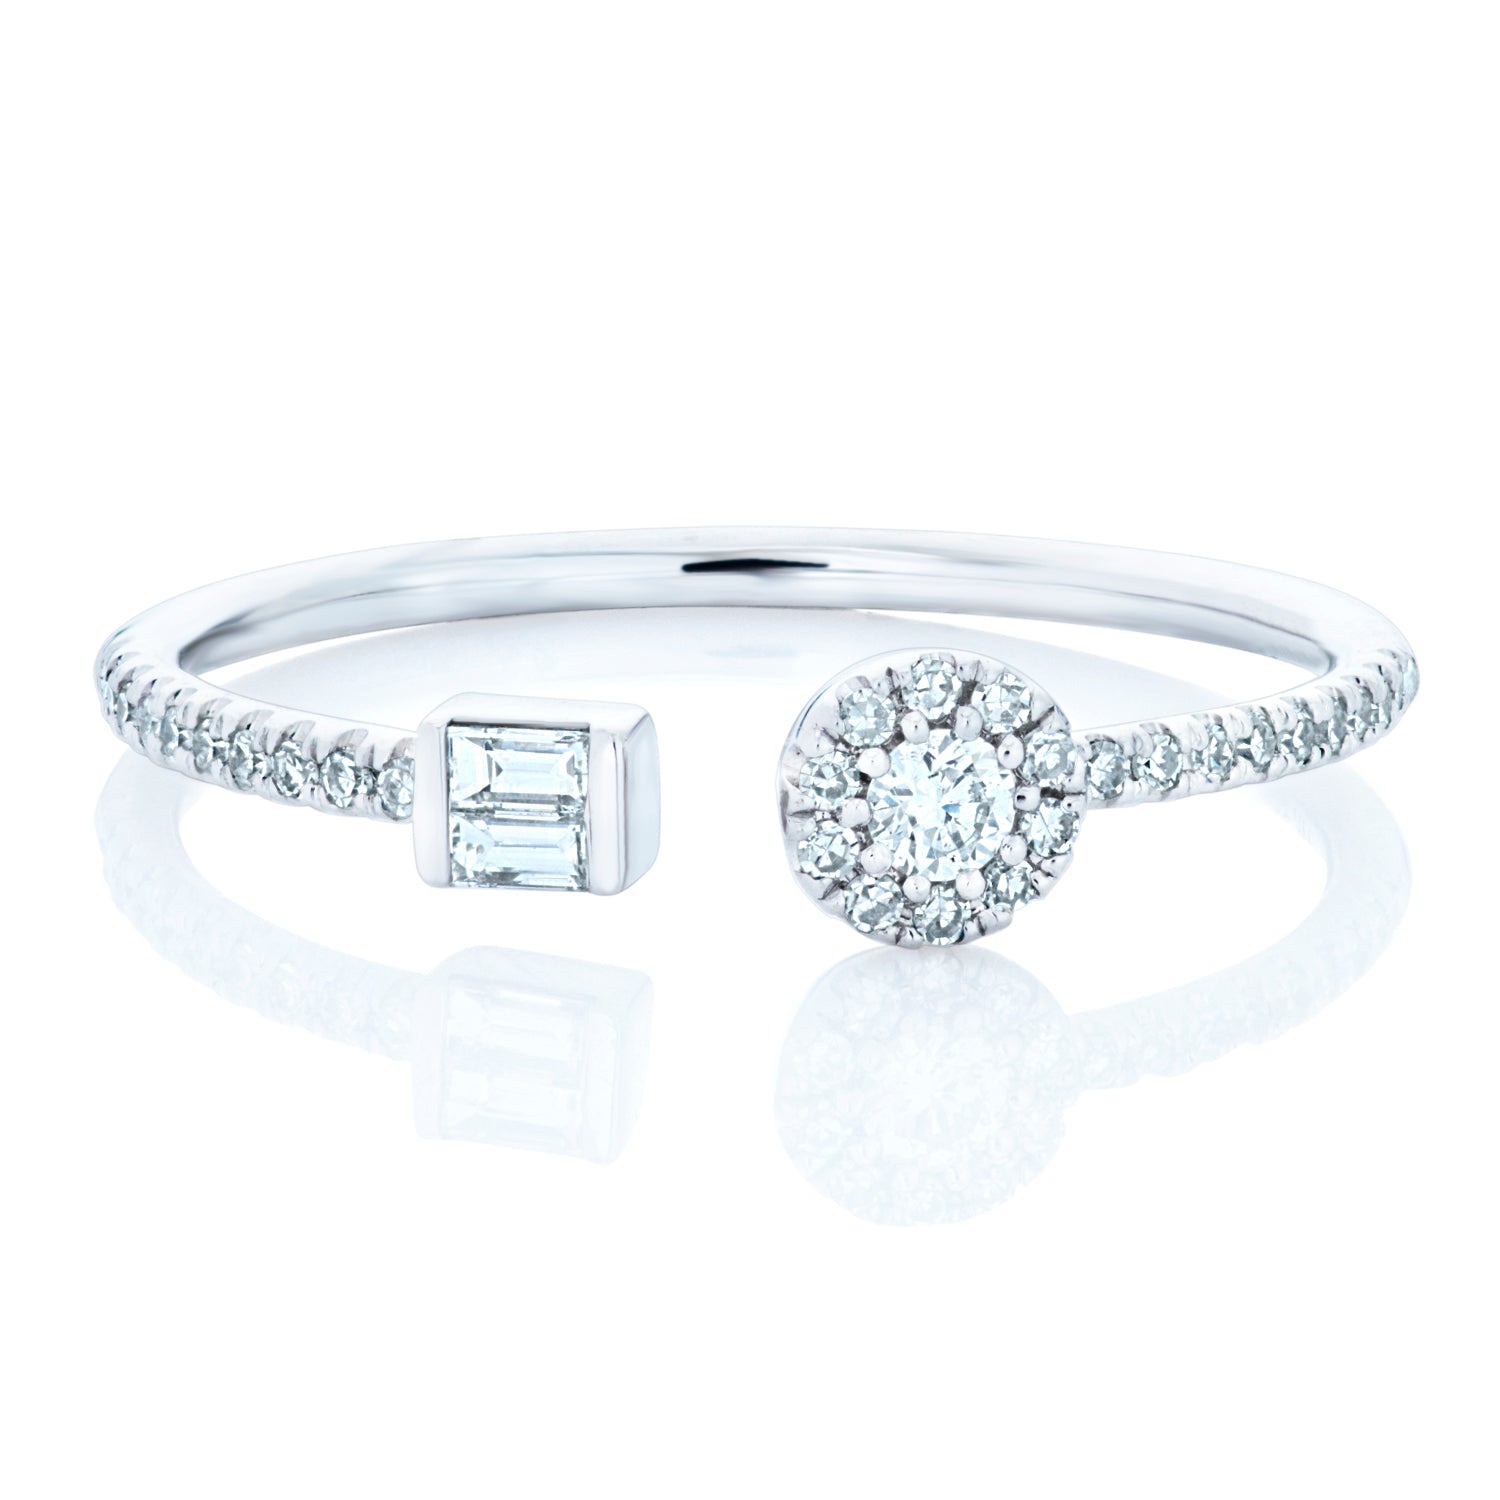 Open 14k White Gold Round and Baguette Cut Diamond Ring